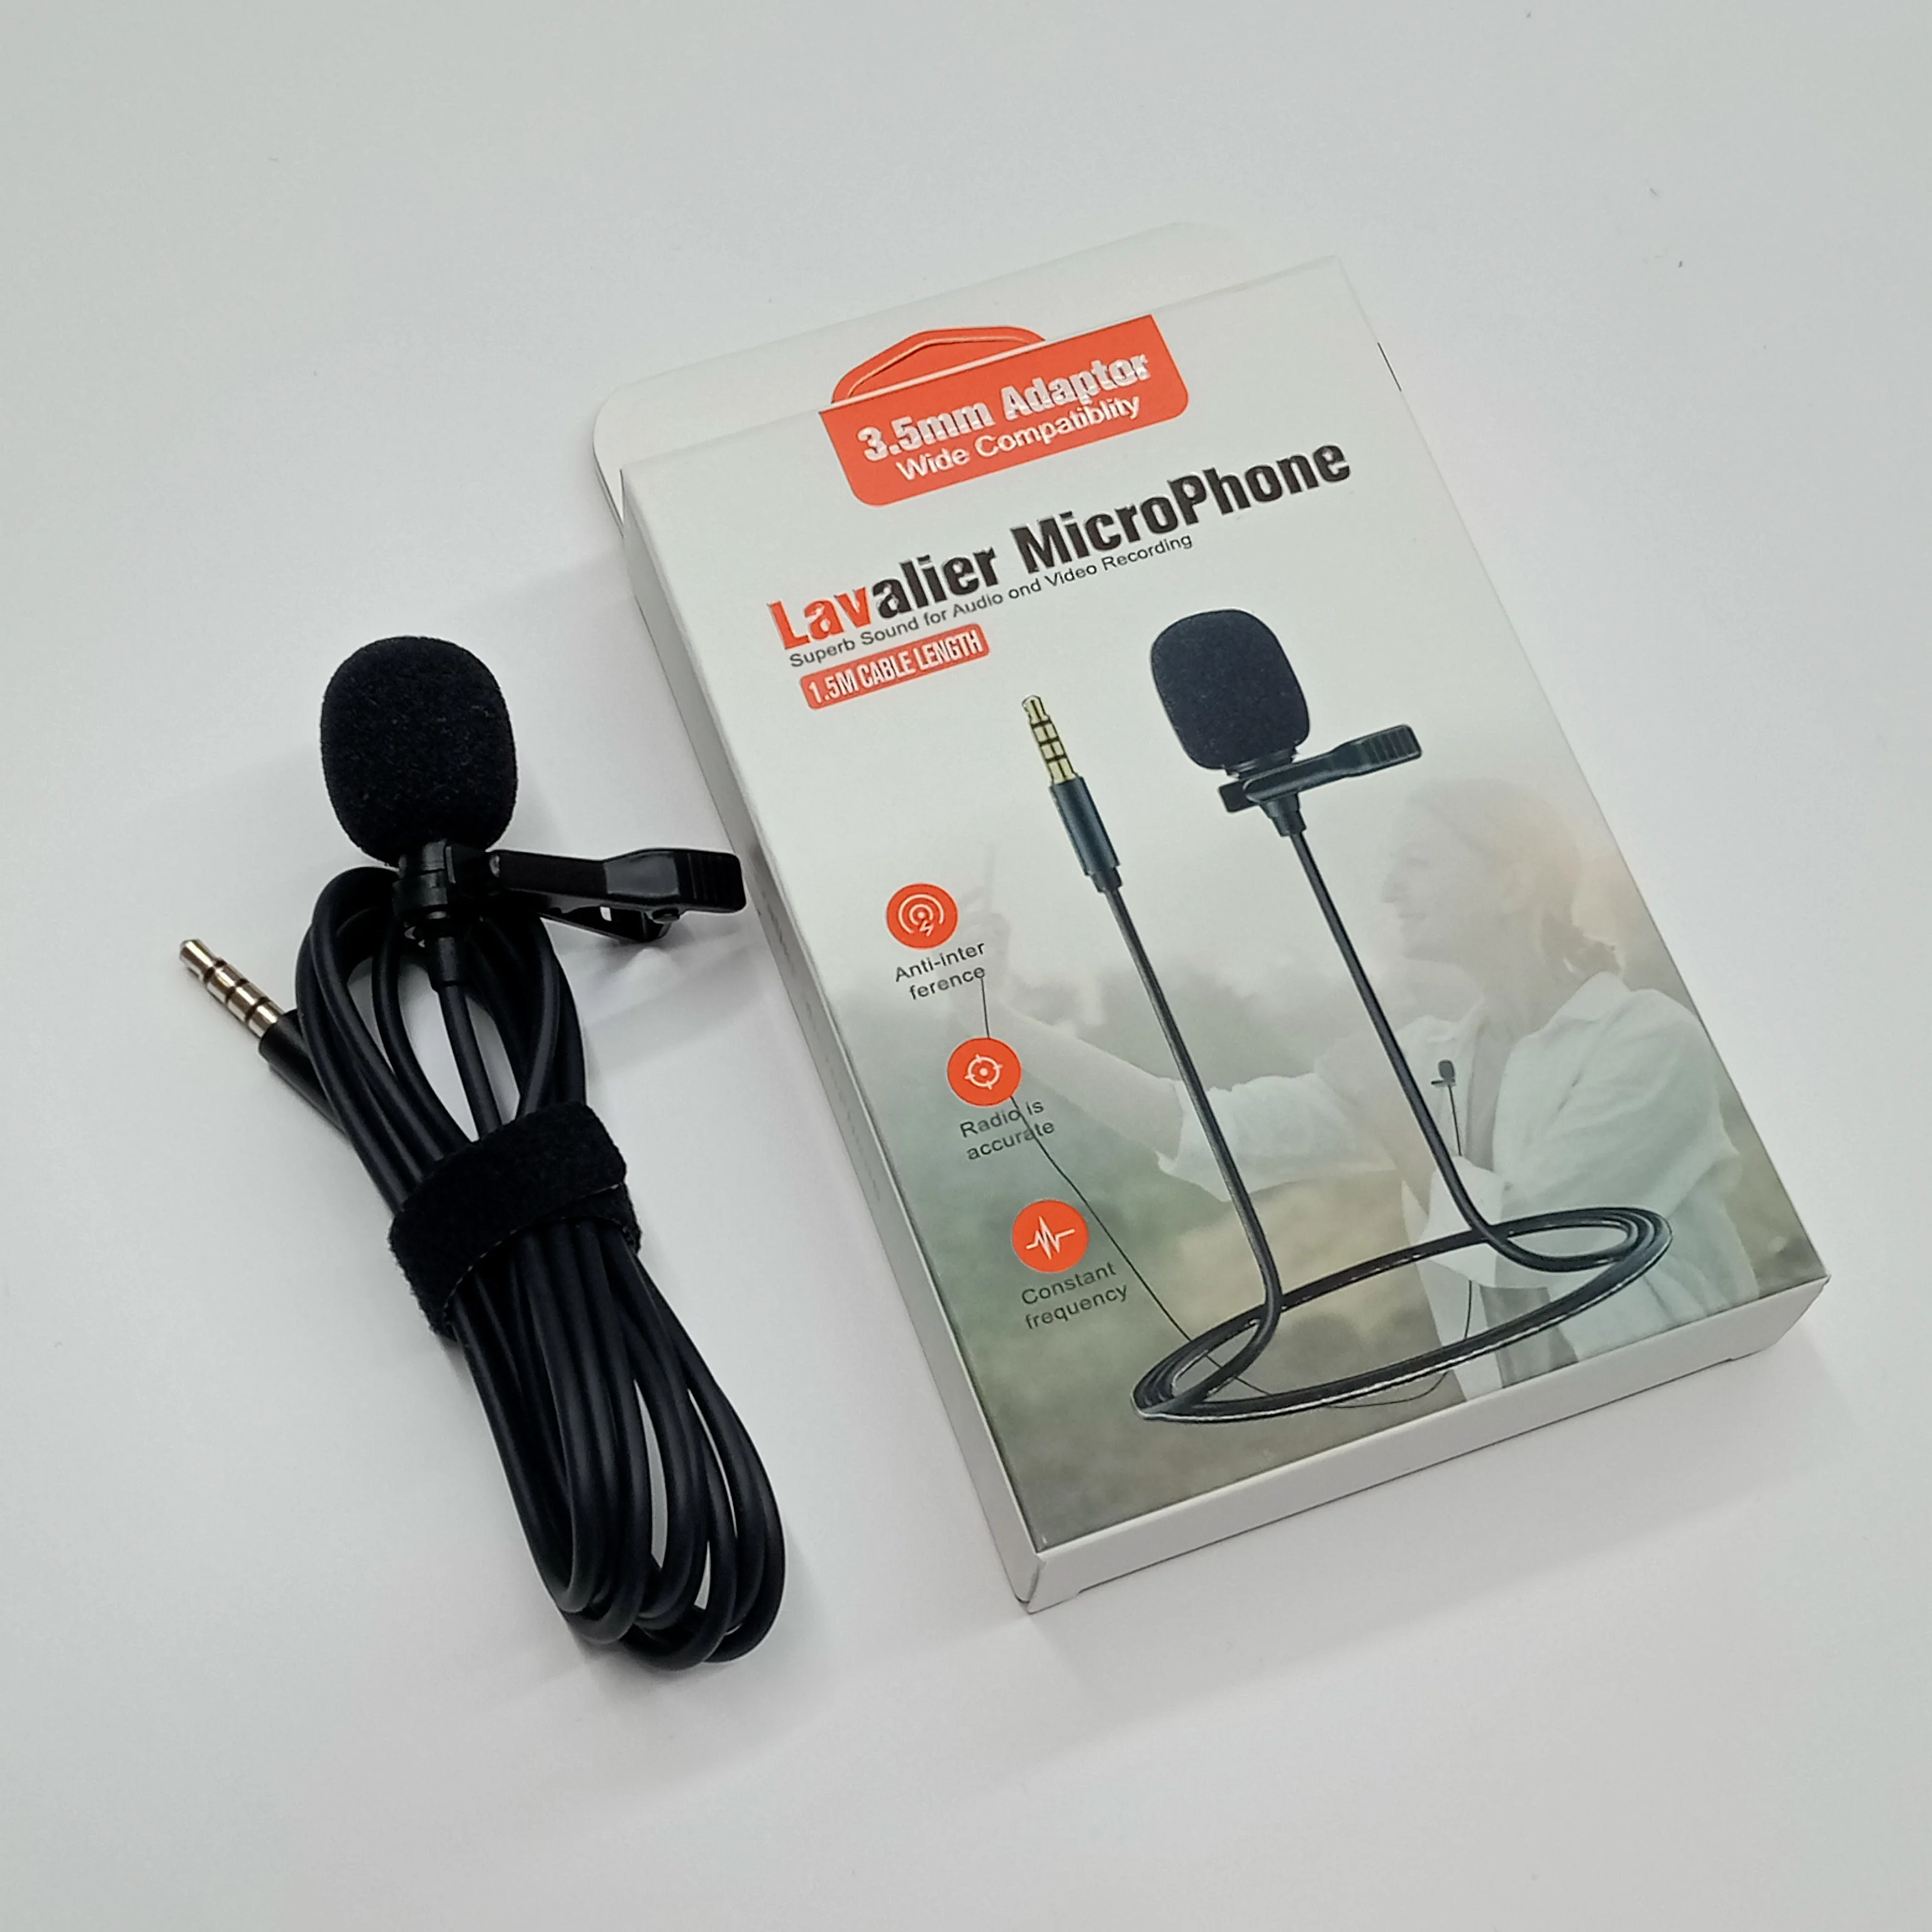 3.5mm Professional Microphone Clip Lapel Microphone Video Recording Audio Mic Microphone for Mobile Phone Camera Microphones